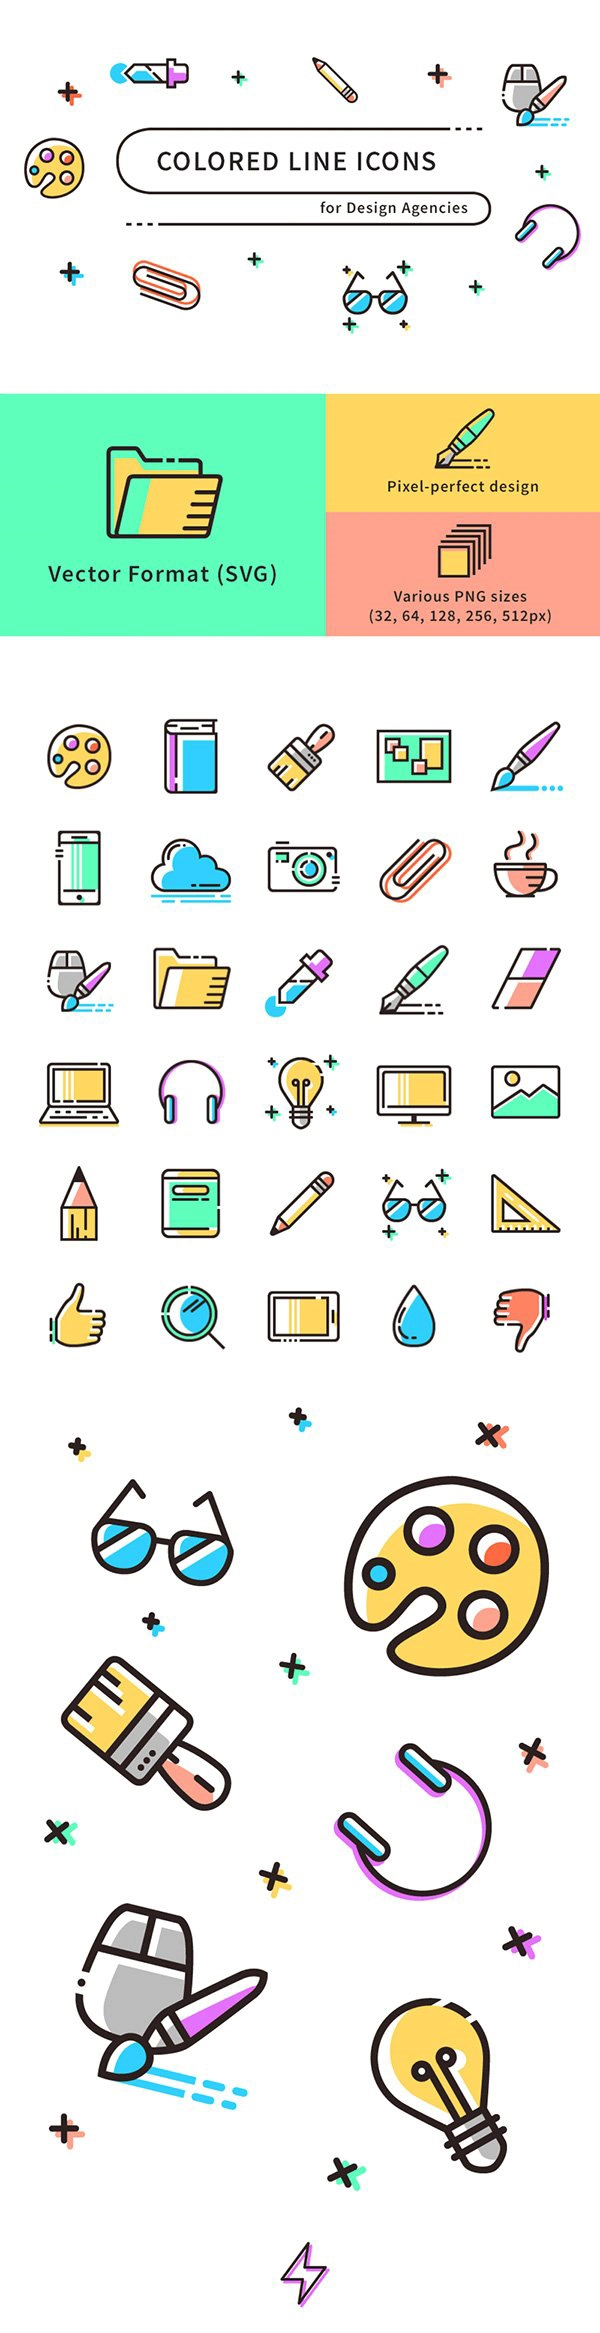 Colored Line Icons (SVG, PNG)